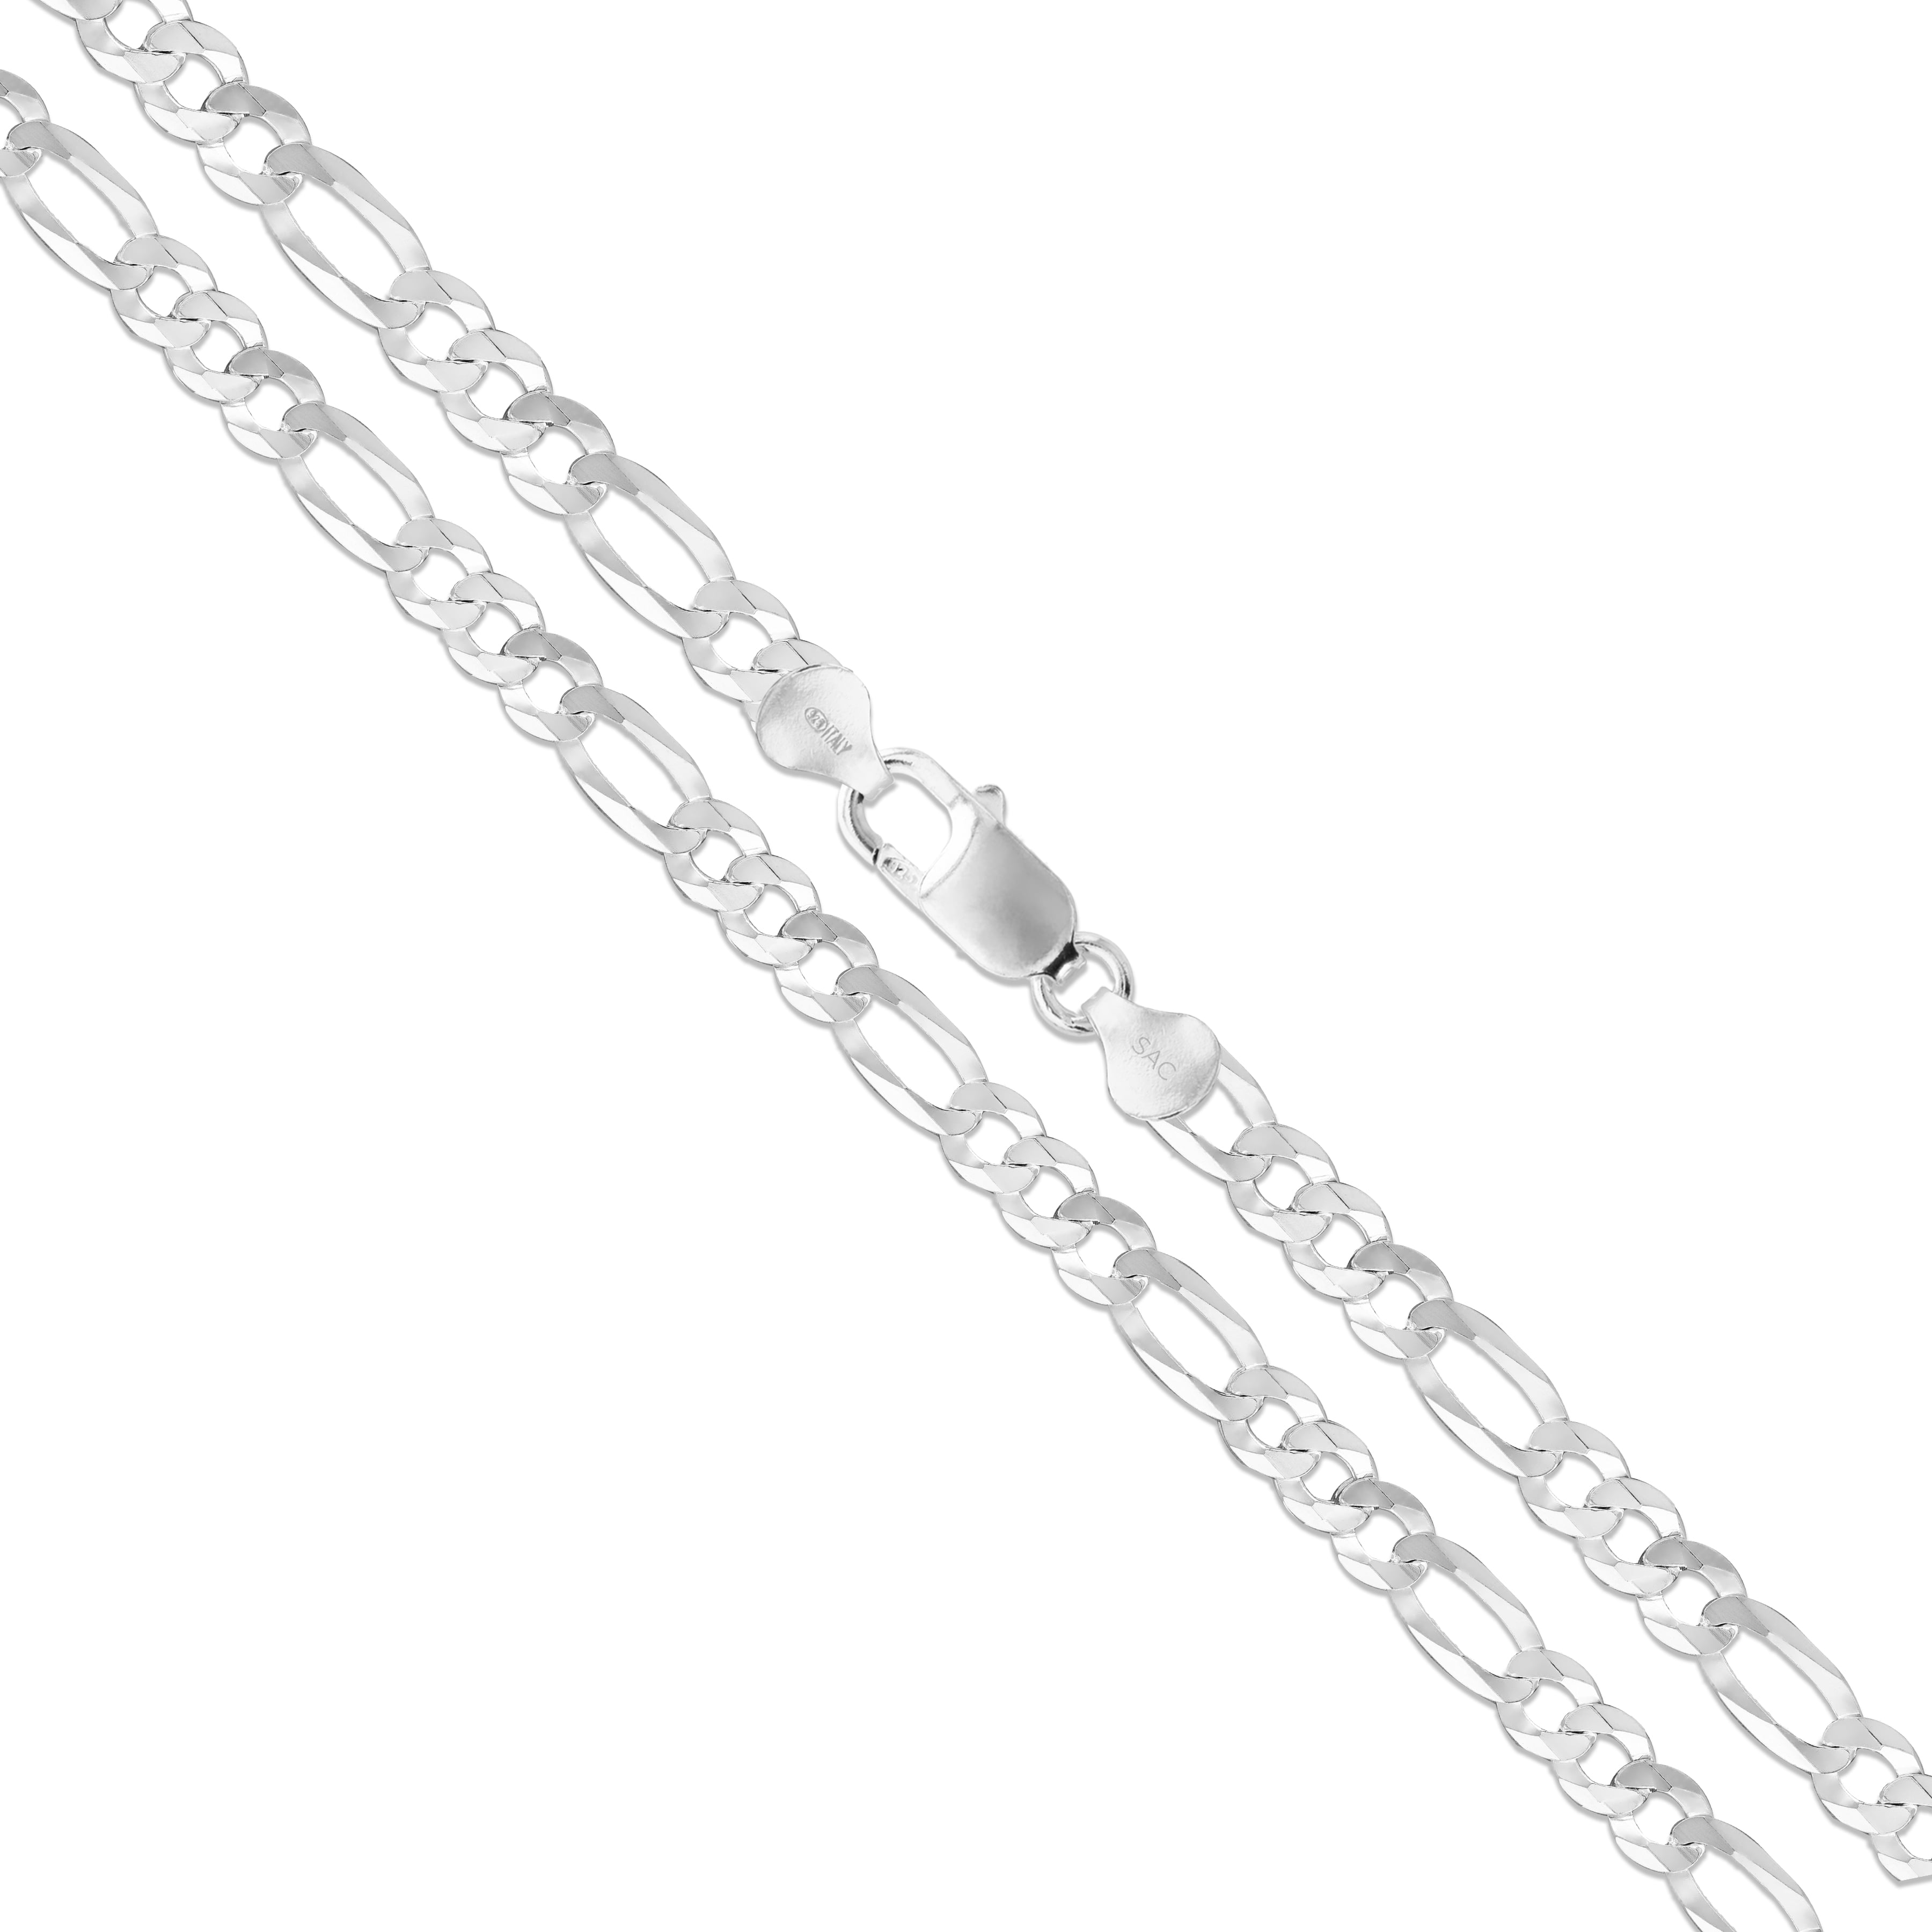 WHOLESALE 925 SOLID STERLING SILVER 5PC PLAIN CHAIN LOT-18 INCH P999